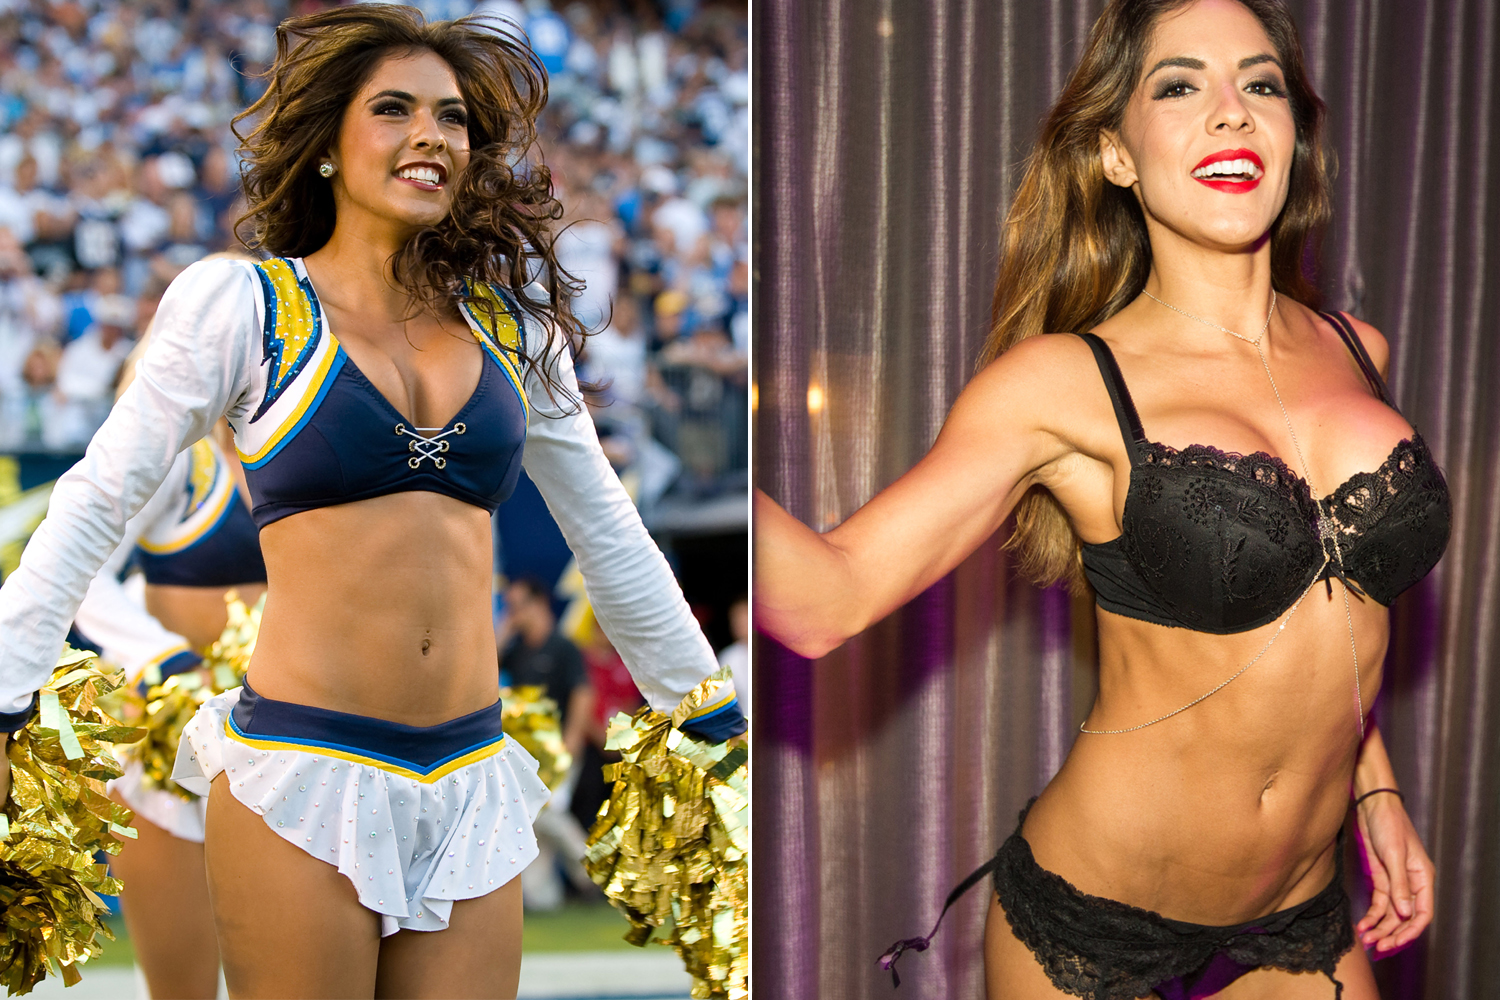 annie maddock recommends hot naked nfl cheerleaders pic